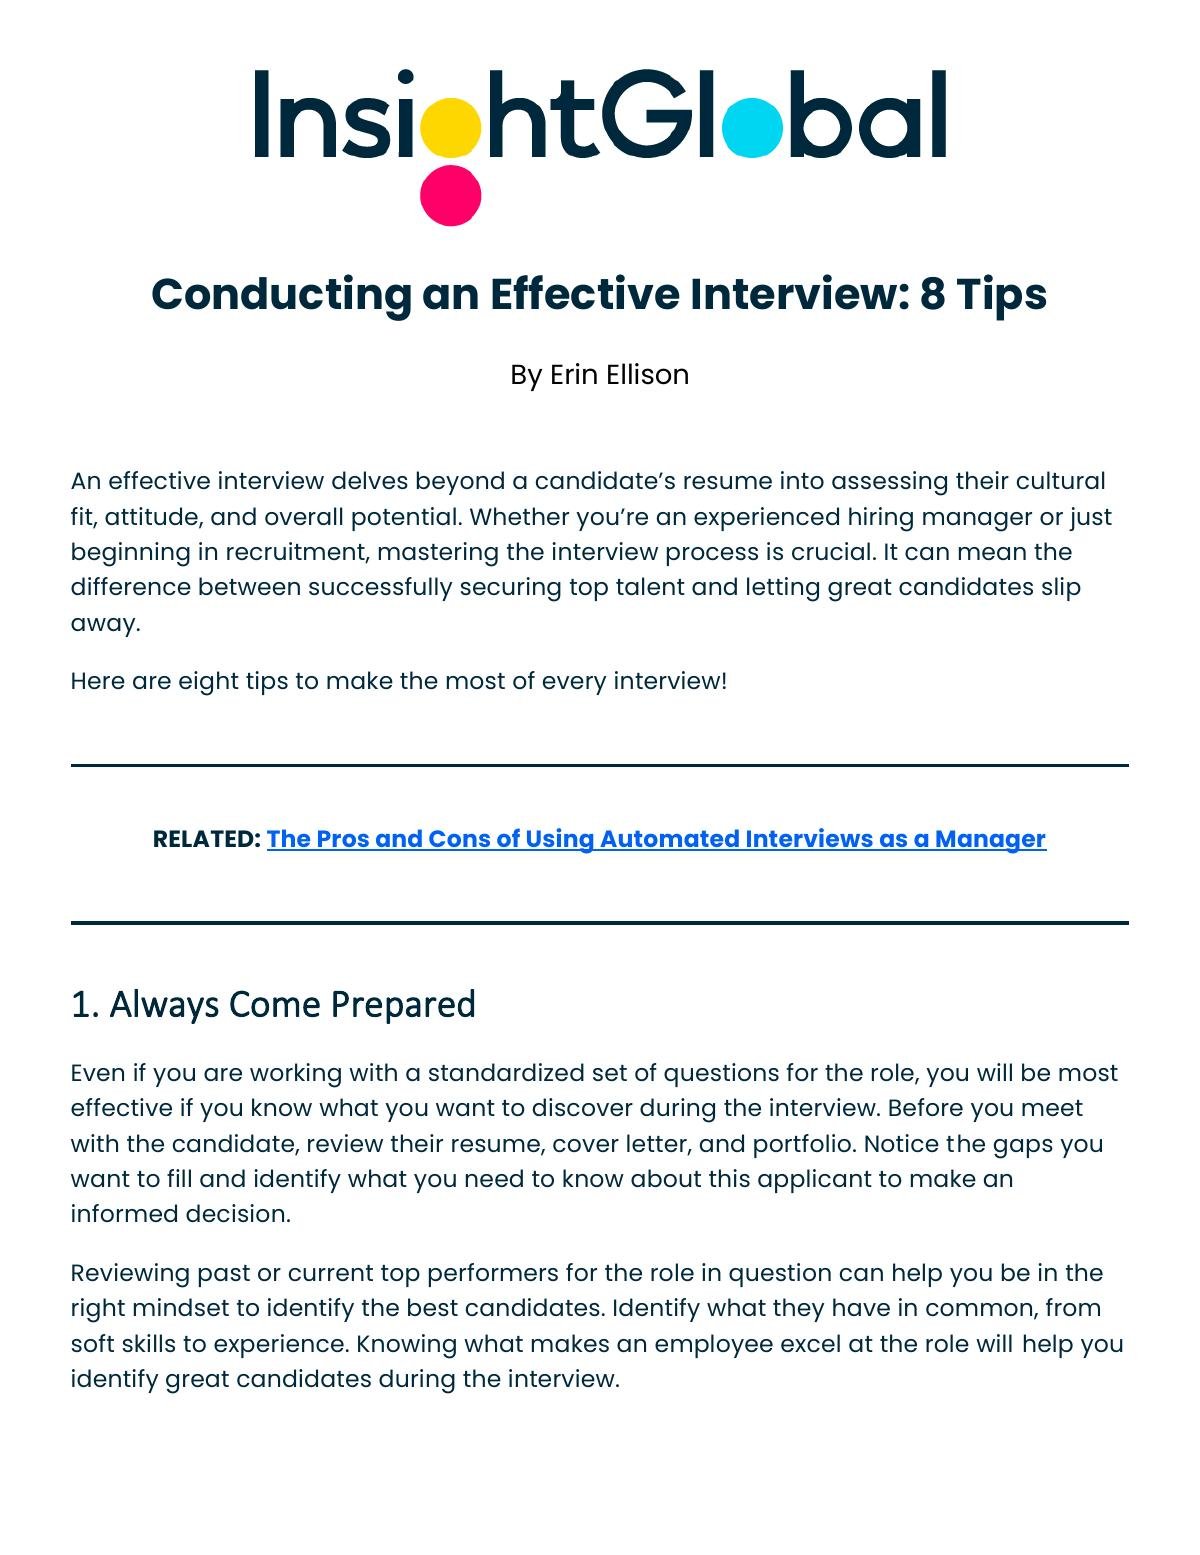 Conducting an Effective Interview: 8 Tips